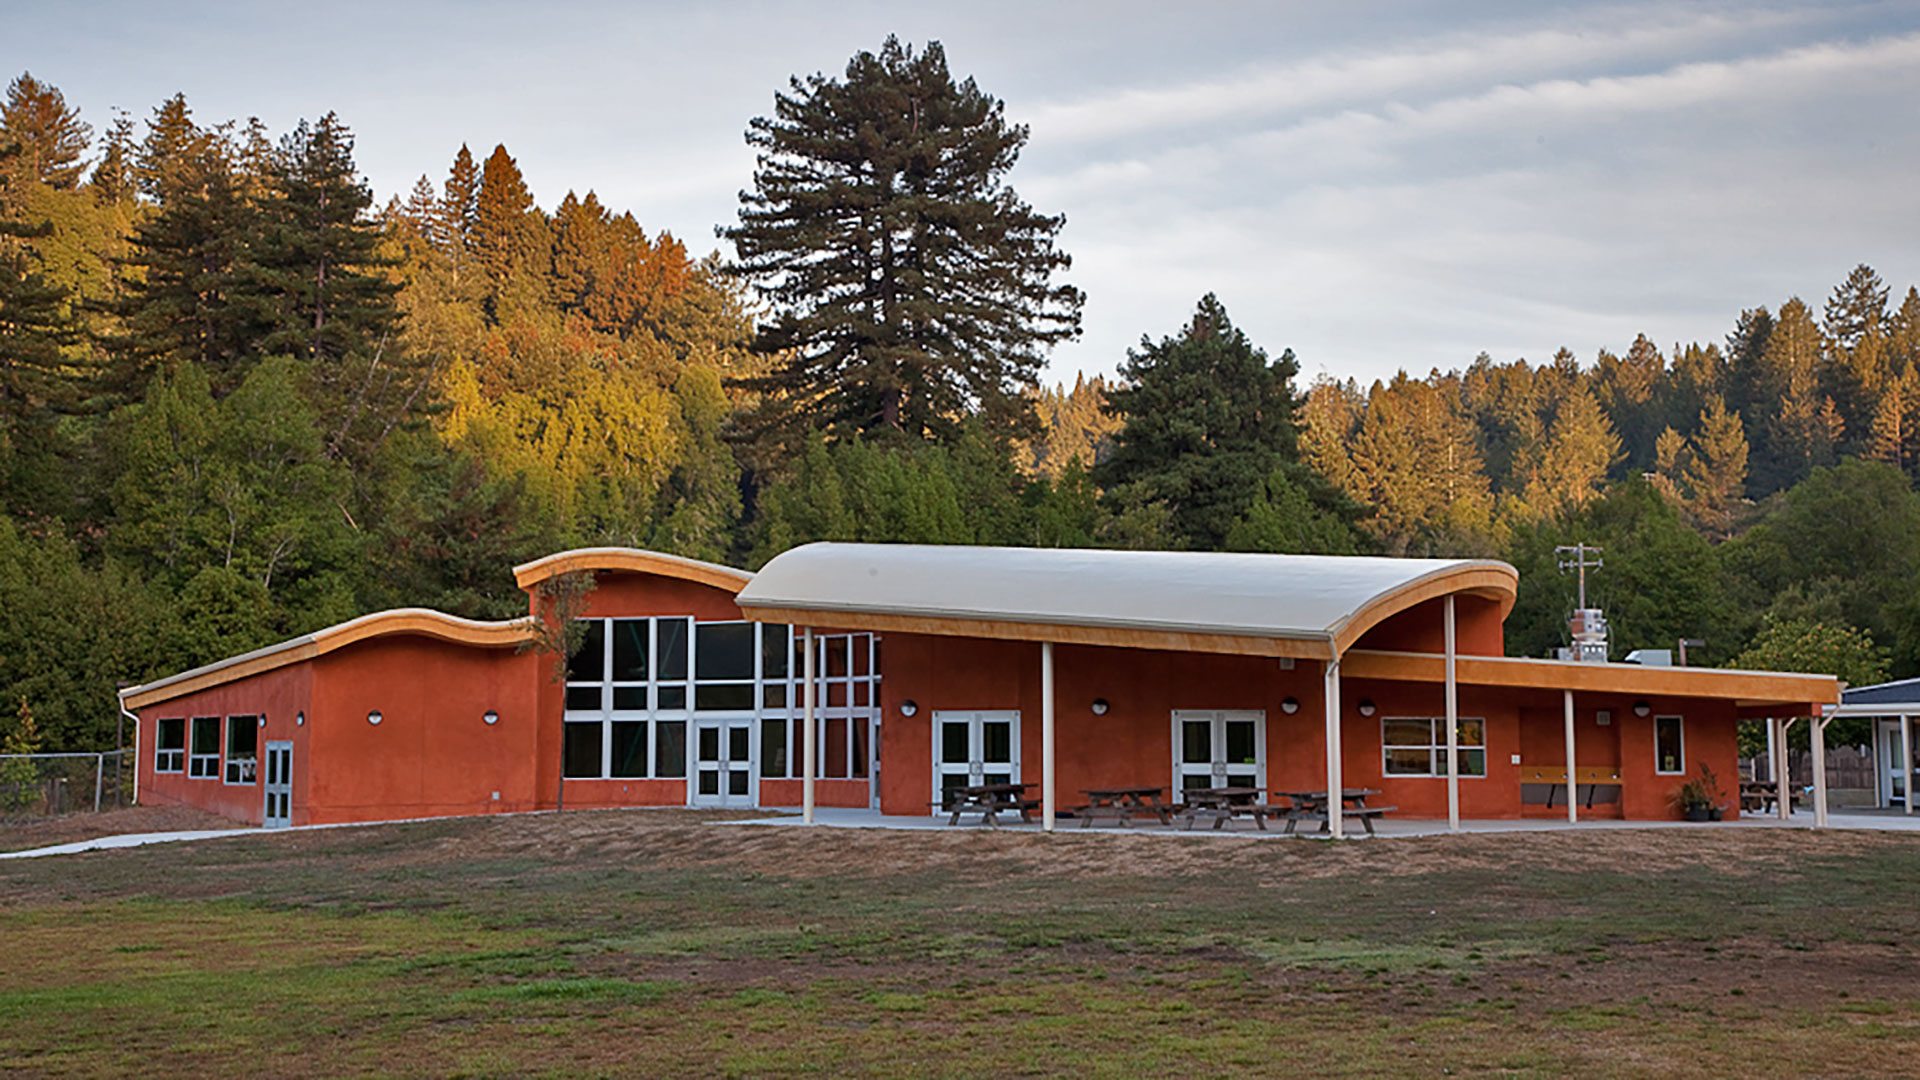 School with orange walls and vast curved roof sitting above double doors.